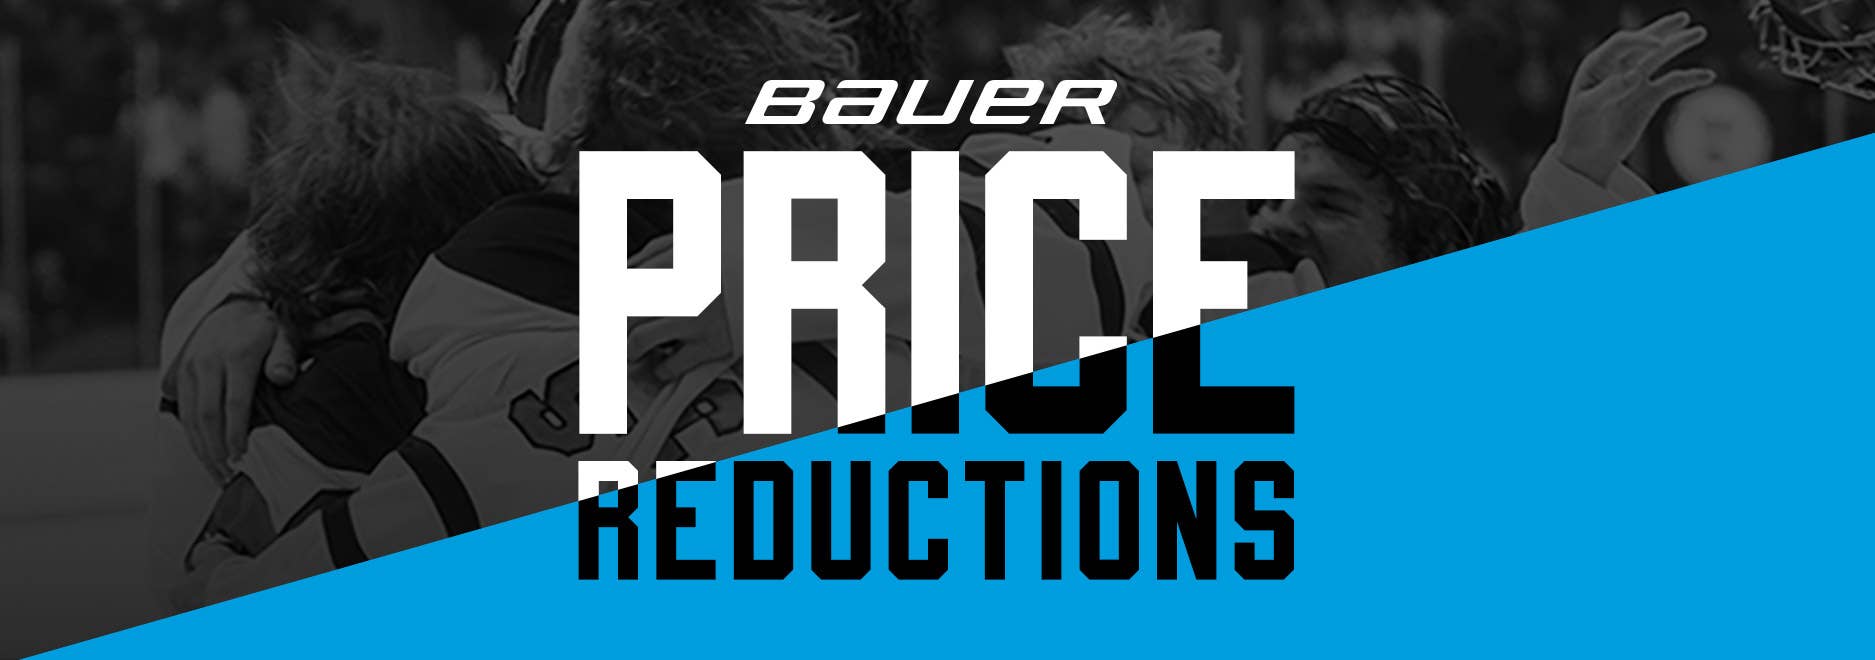 Bauer Price Reductions